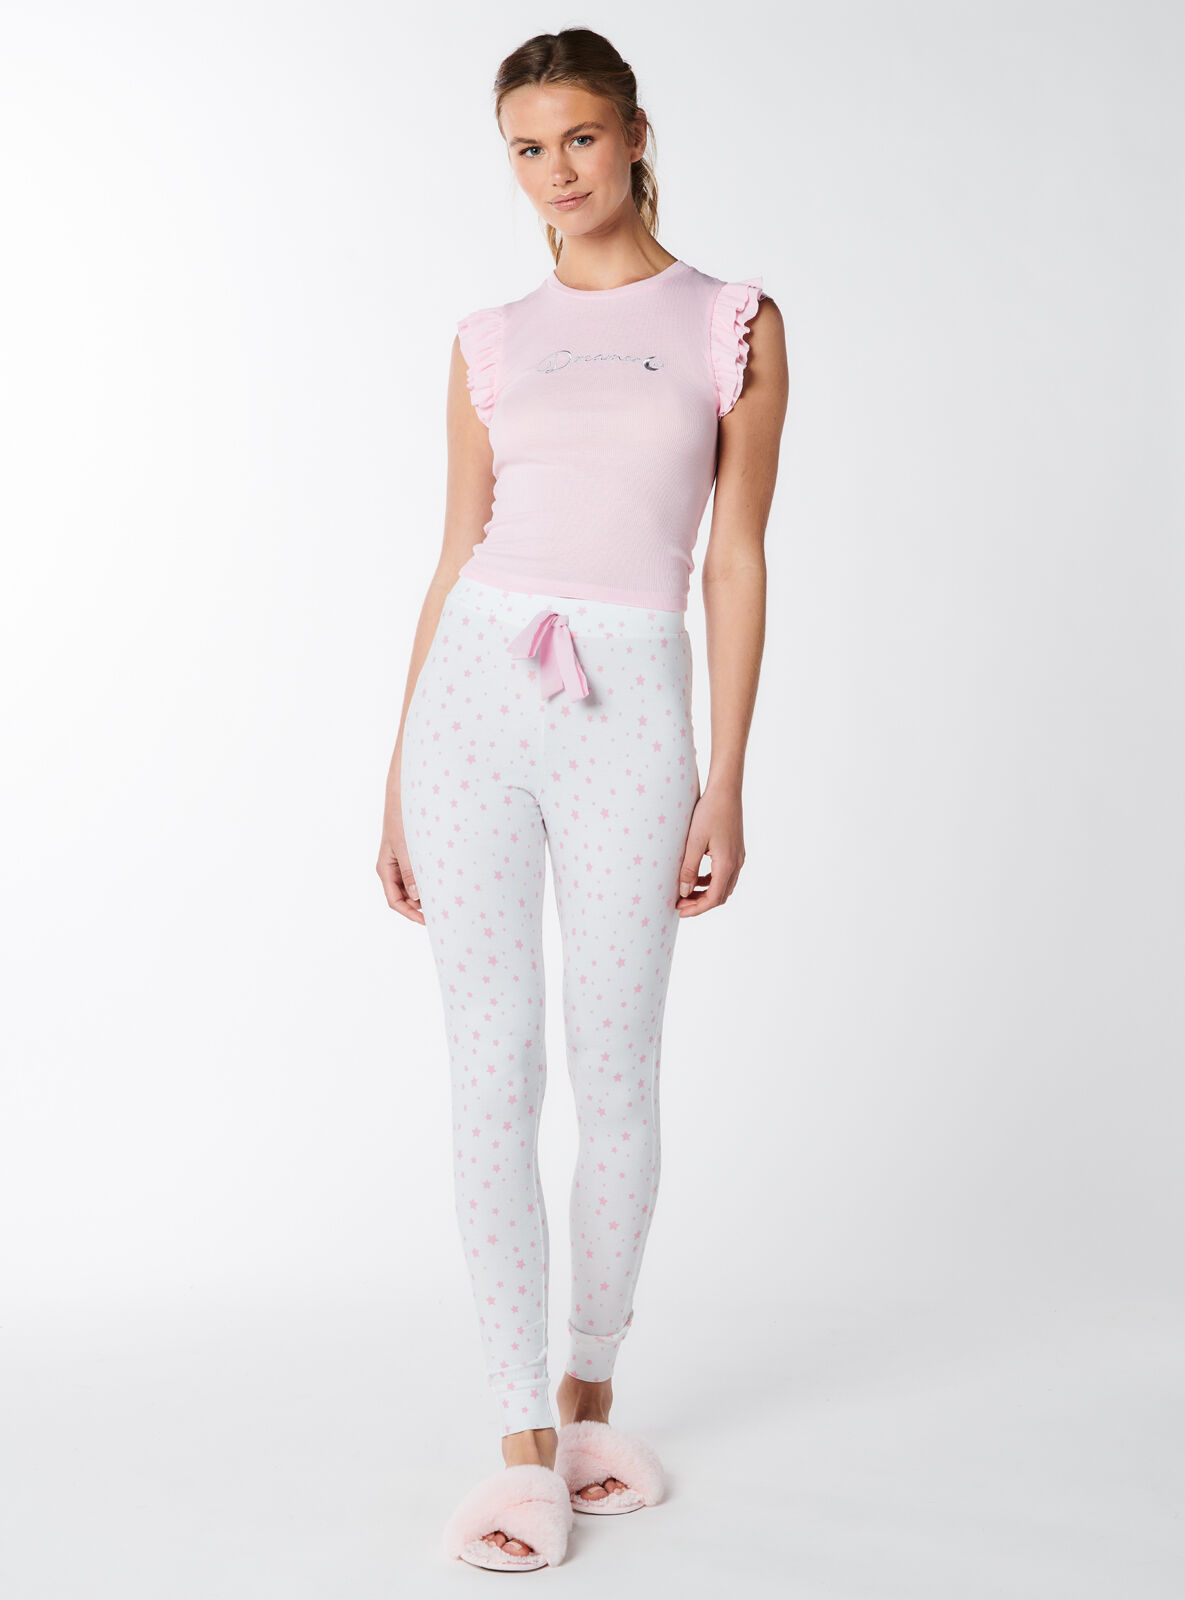 Boux Avenue Dreamer frill tee and leggings set - Pink Mix - 14